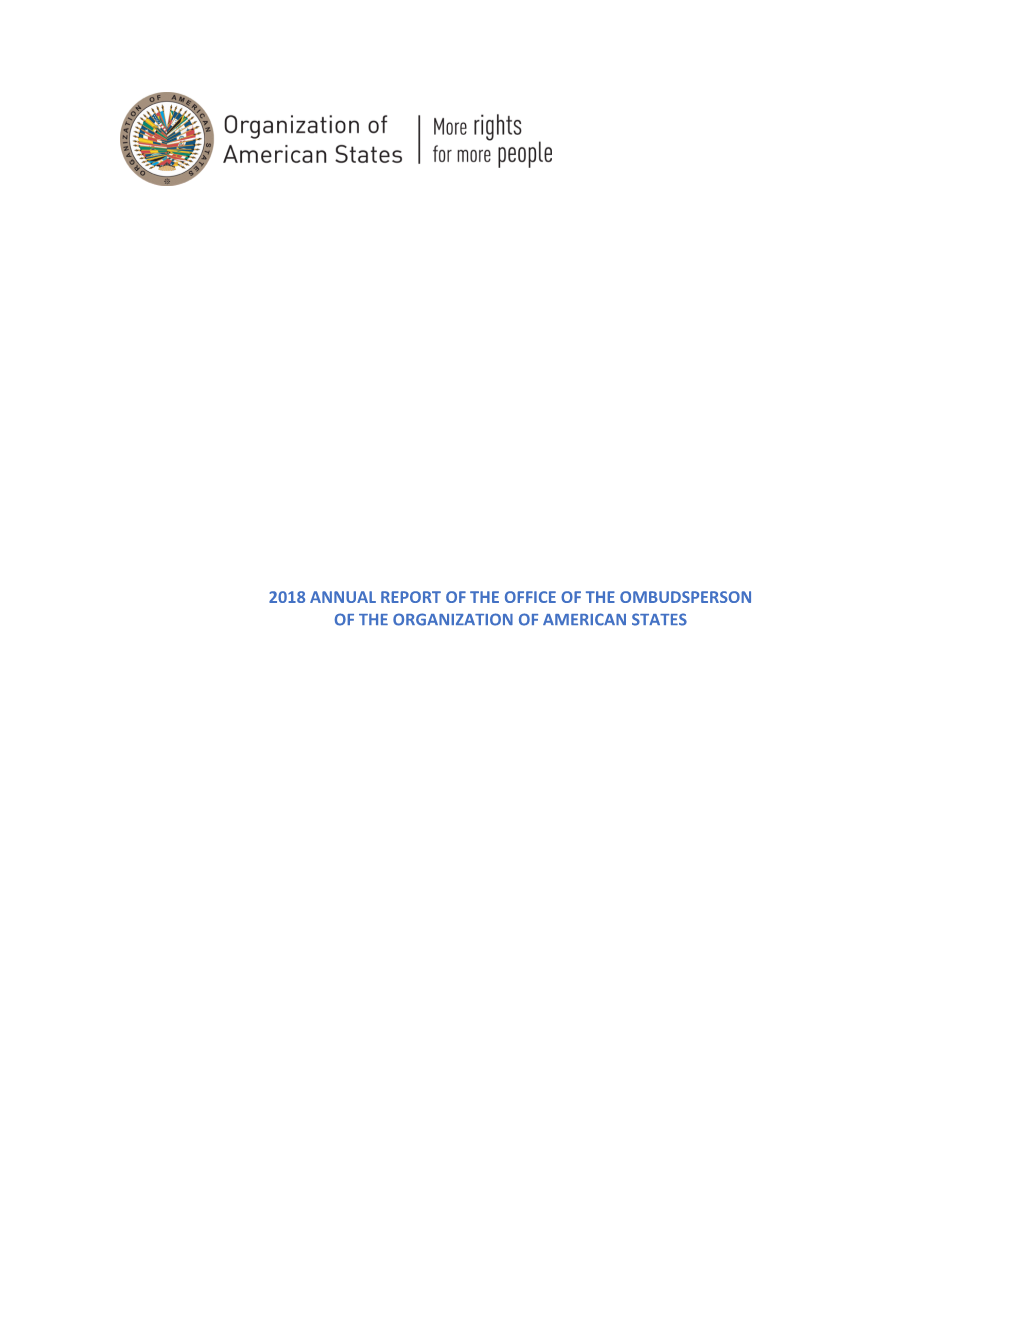 2018 Annual Report of the Office of the Ombudsperson of the Organization of American States